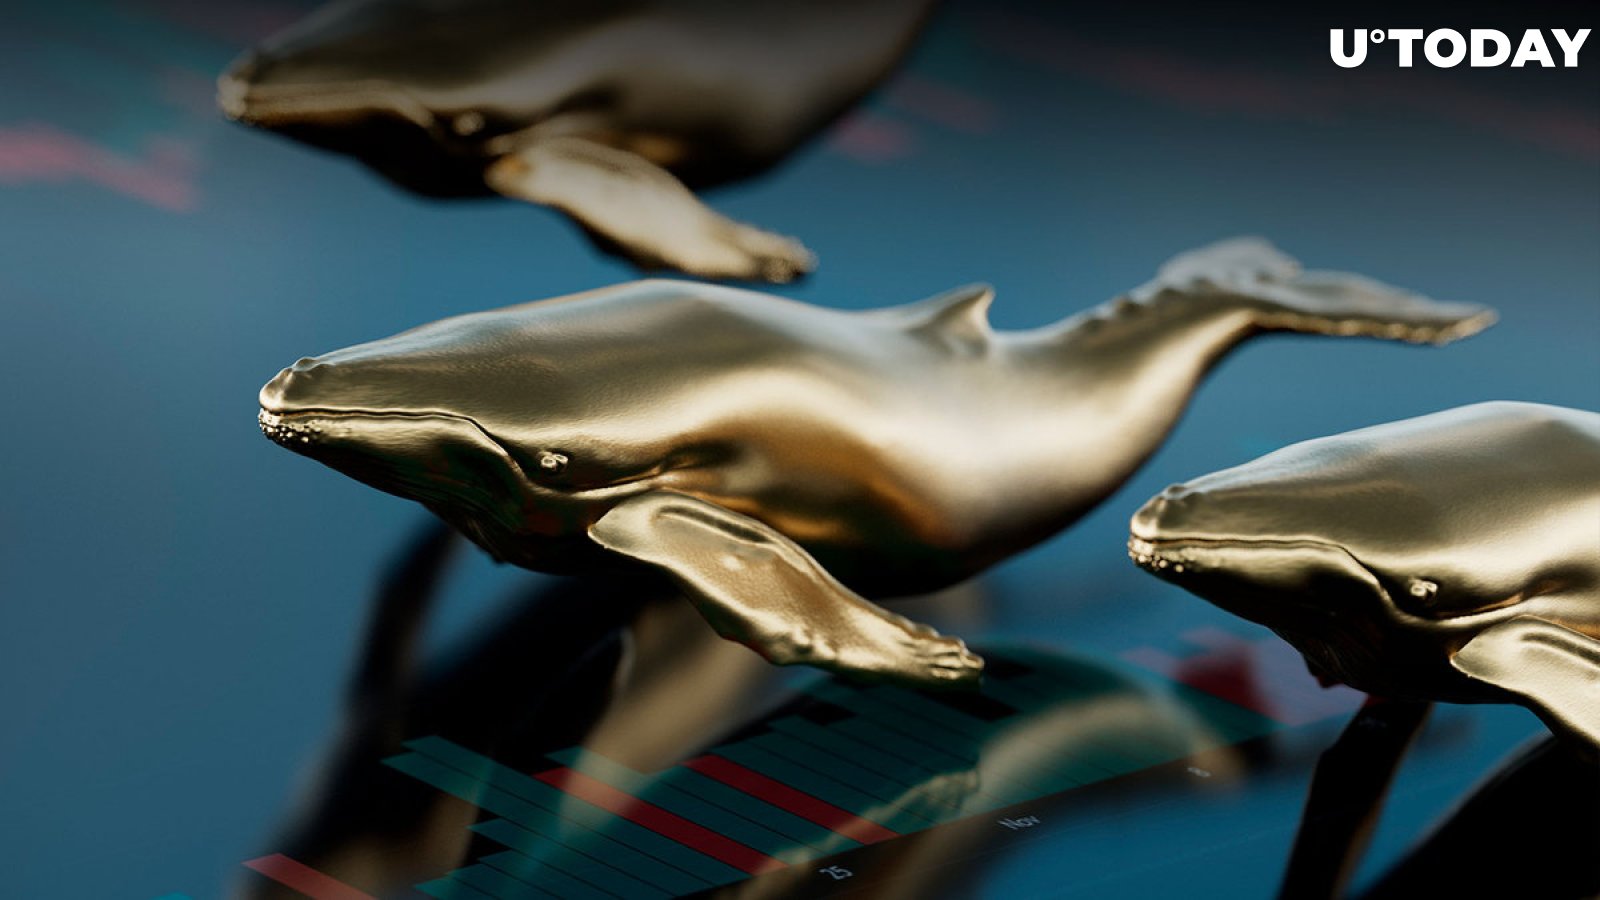 Satoshi-era Bitcoin whales wake up and sell their holdings